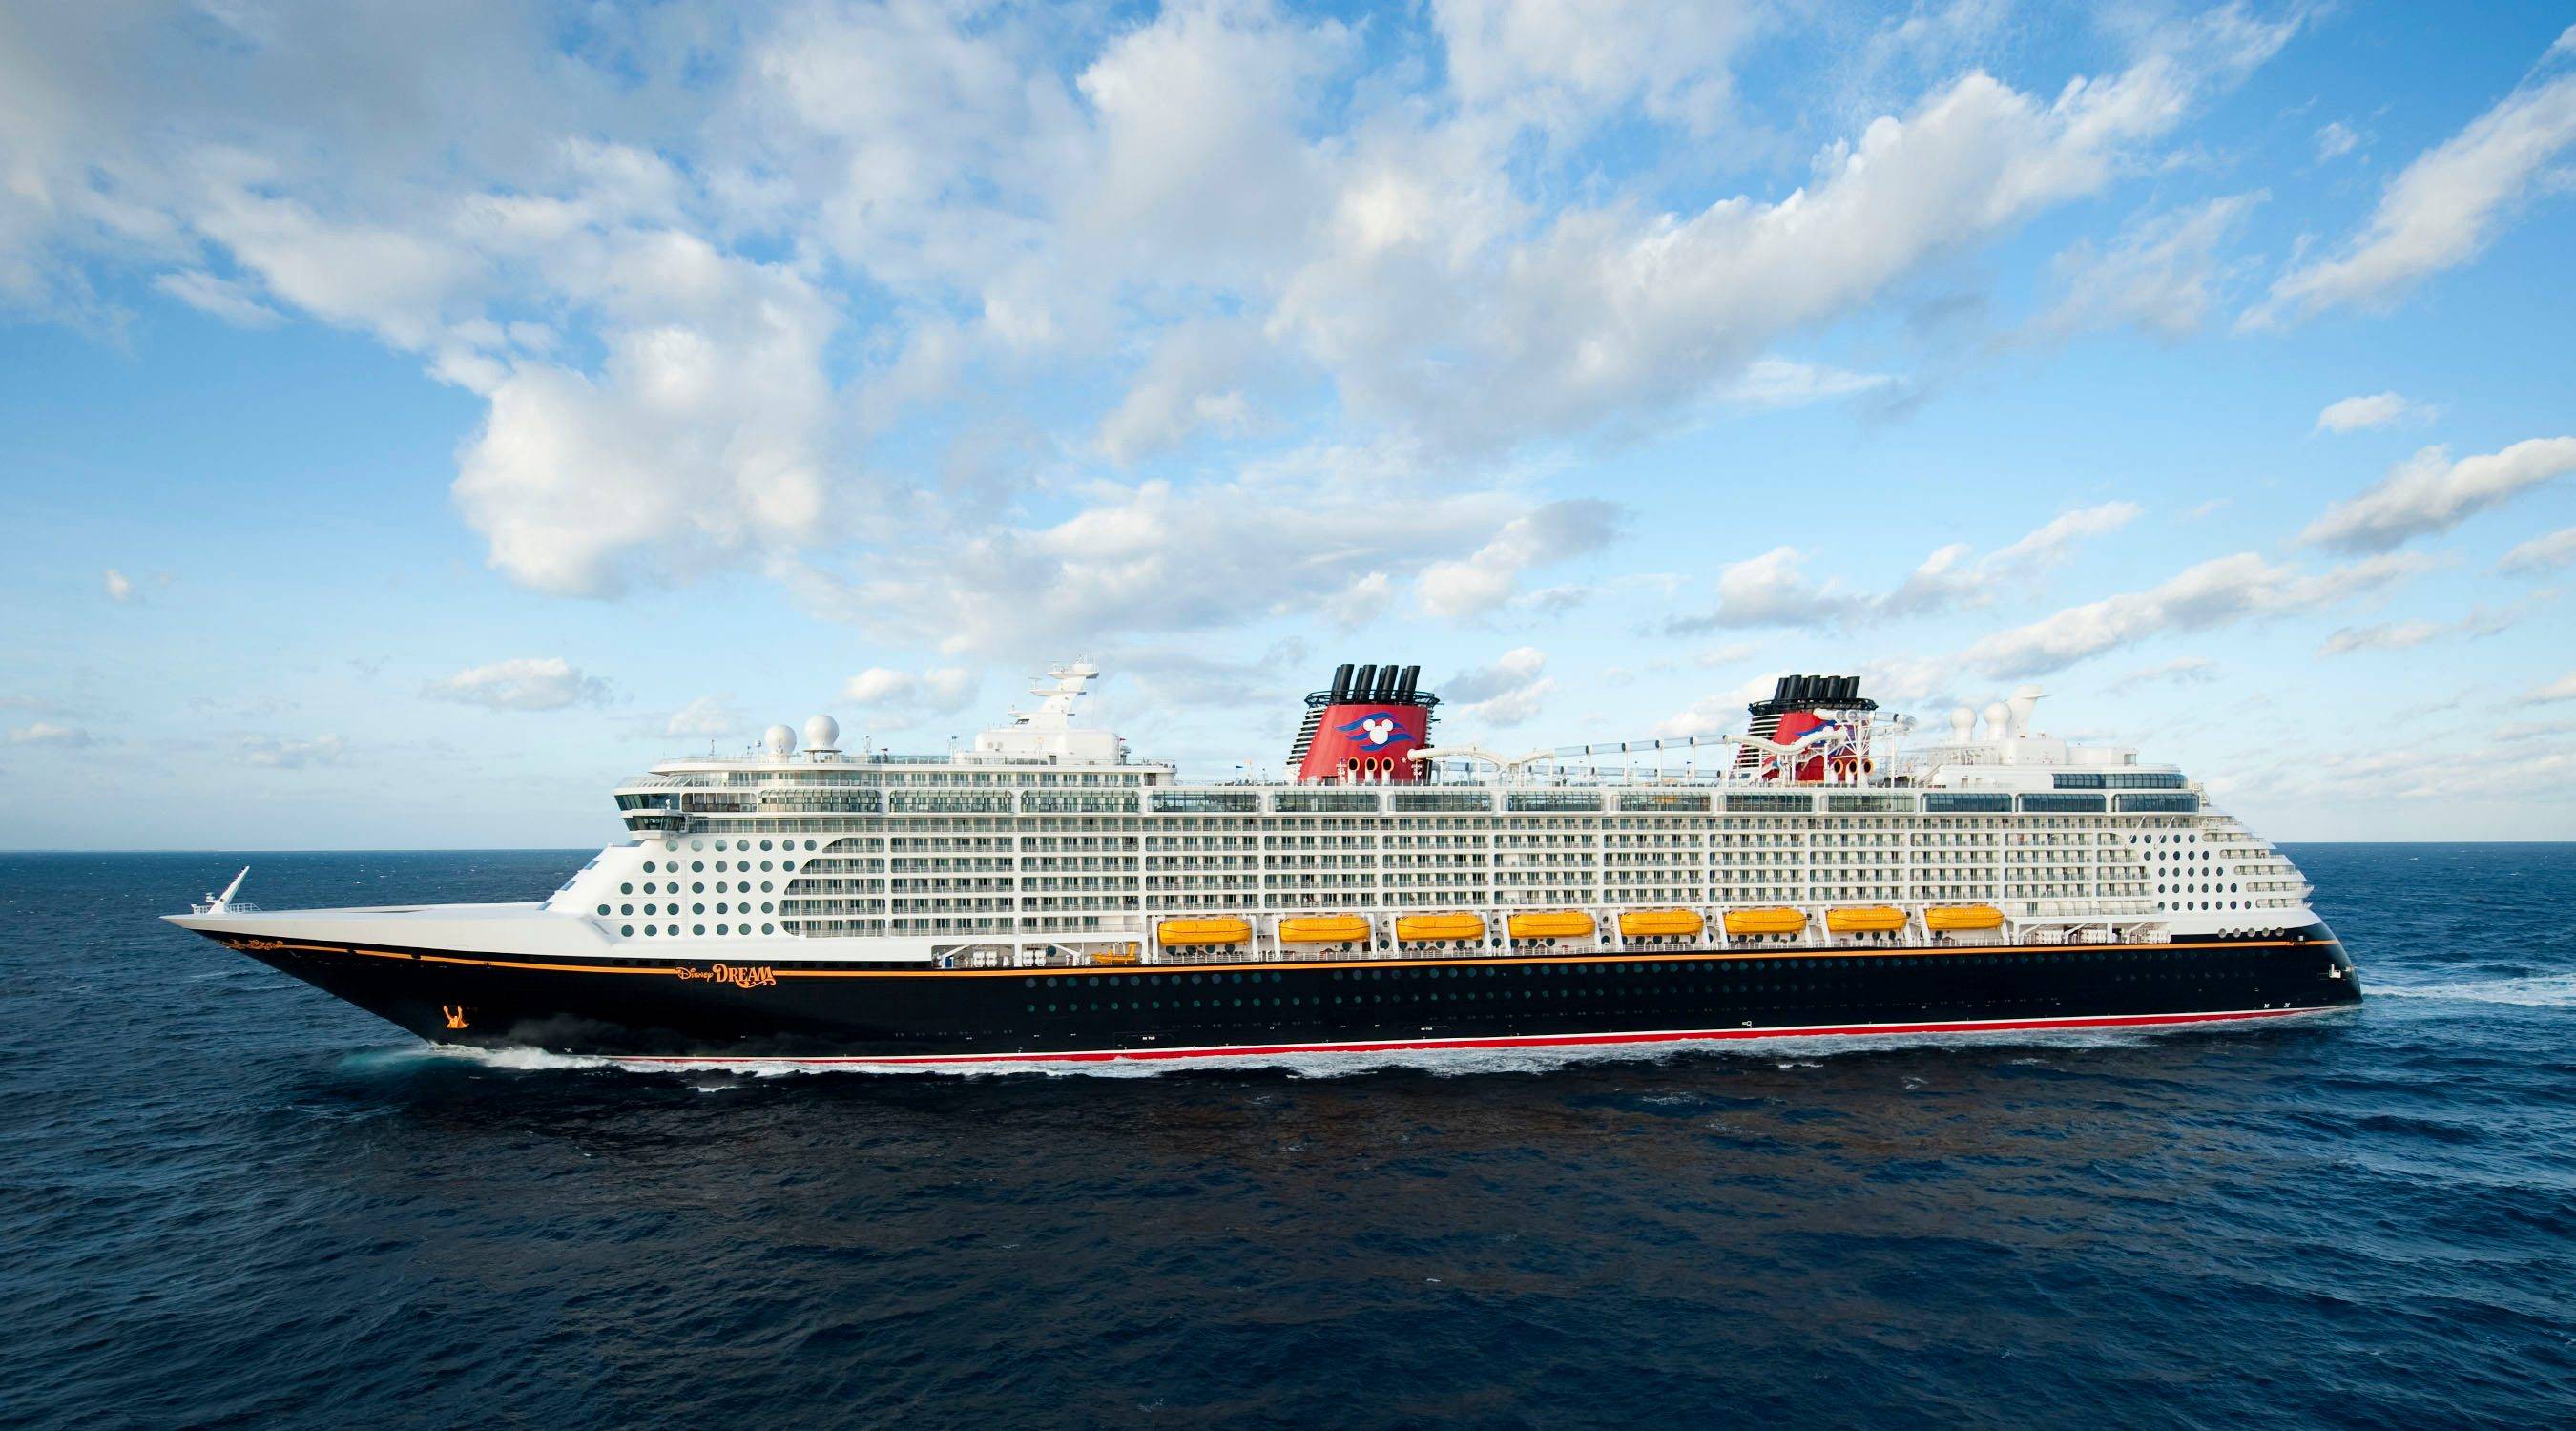 Disney Cruise Line returned August 2021 after more than a year of suspended sailings